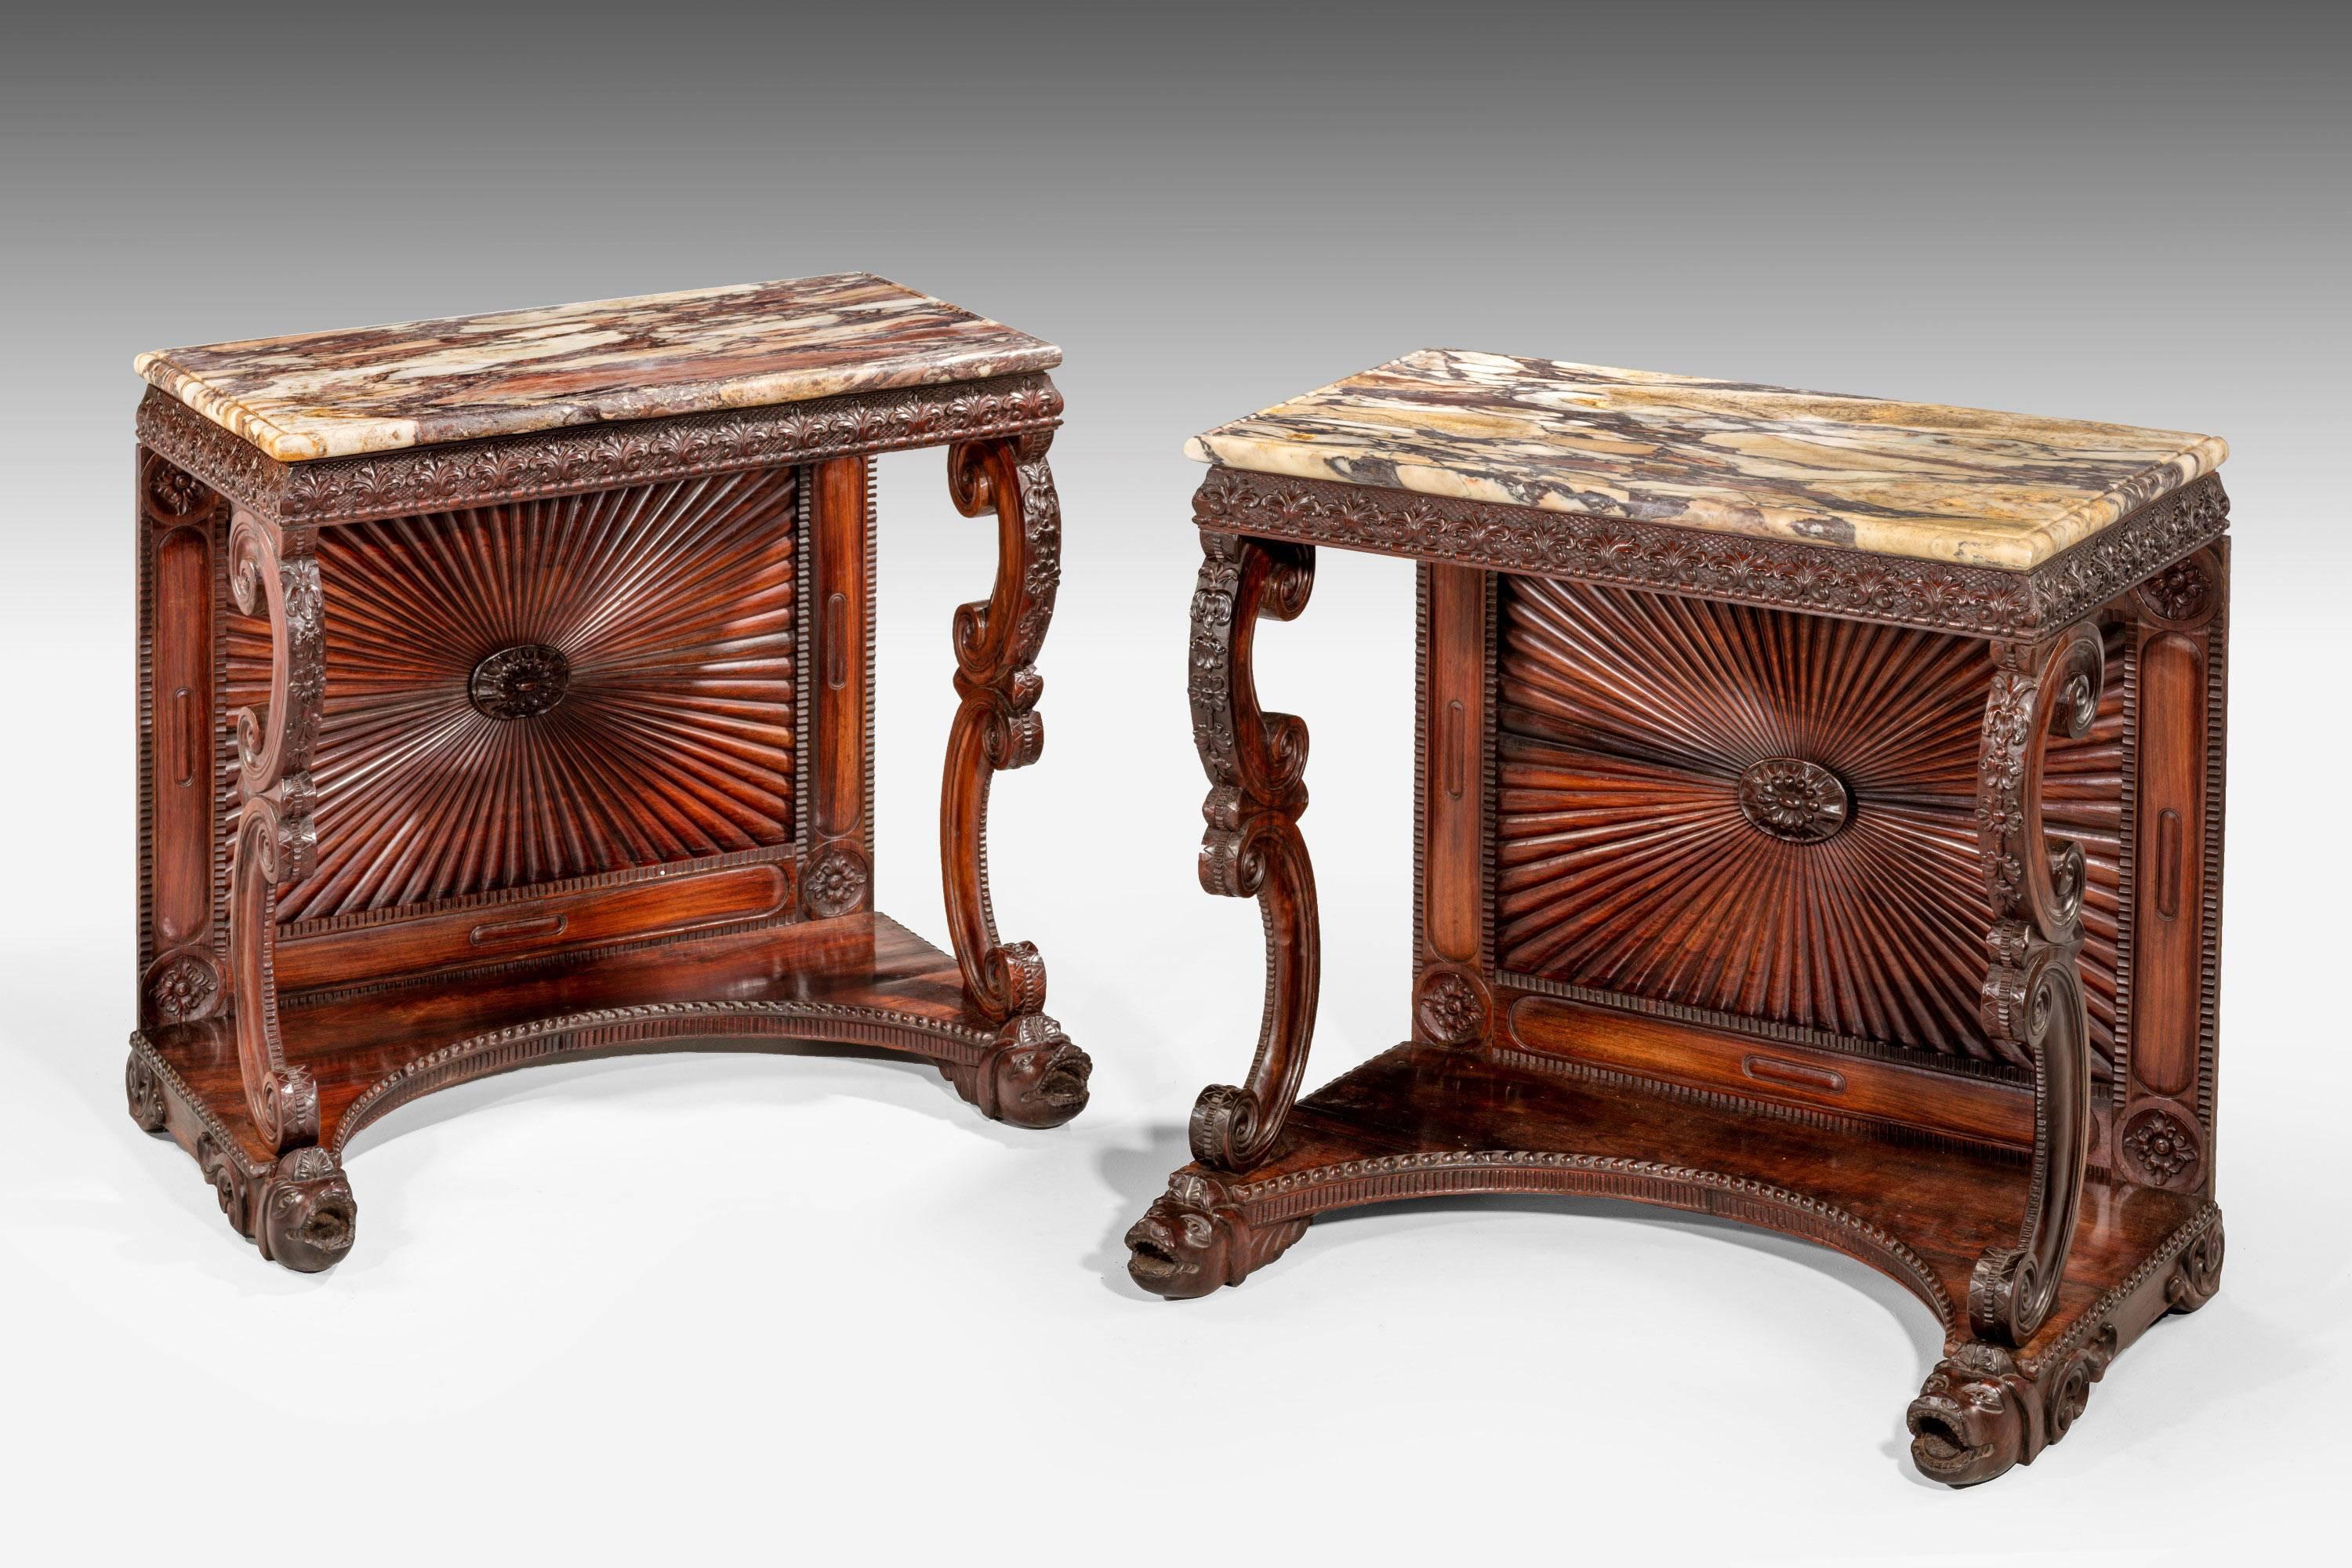 A very finely carved pair of Regency rosewood pier tables, with elaborately scrolled front supports. The borders of extended fleur-de-lys design. Concave platform bases in front of beautifully carved radiating back boards. The whole of the highest